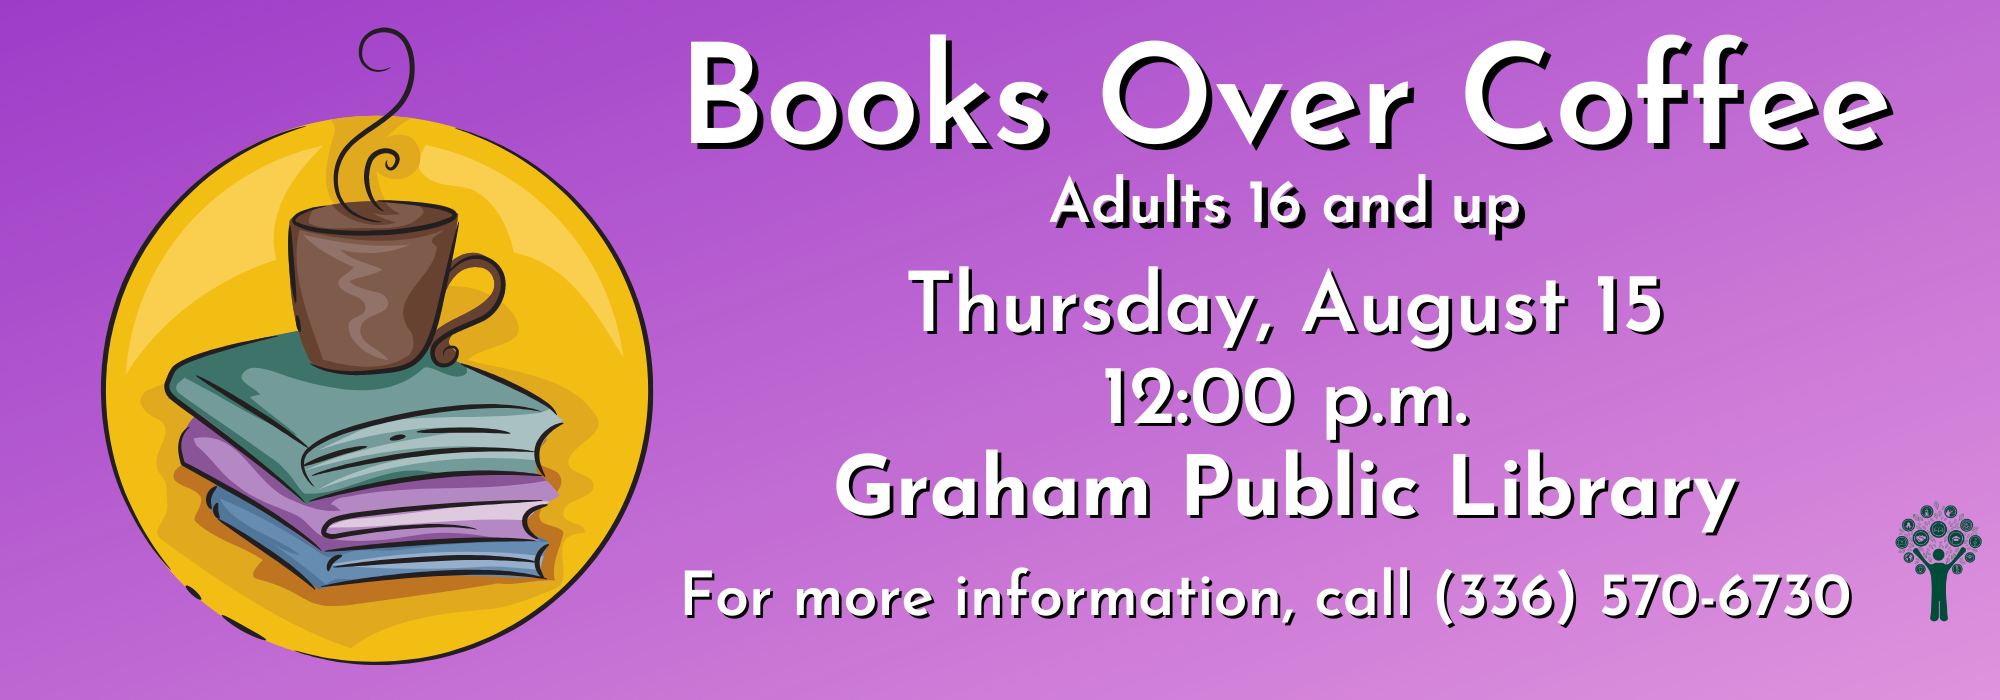 8.15 at Noon - Books Over Coffee at Graham